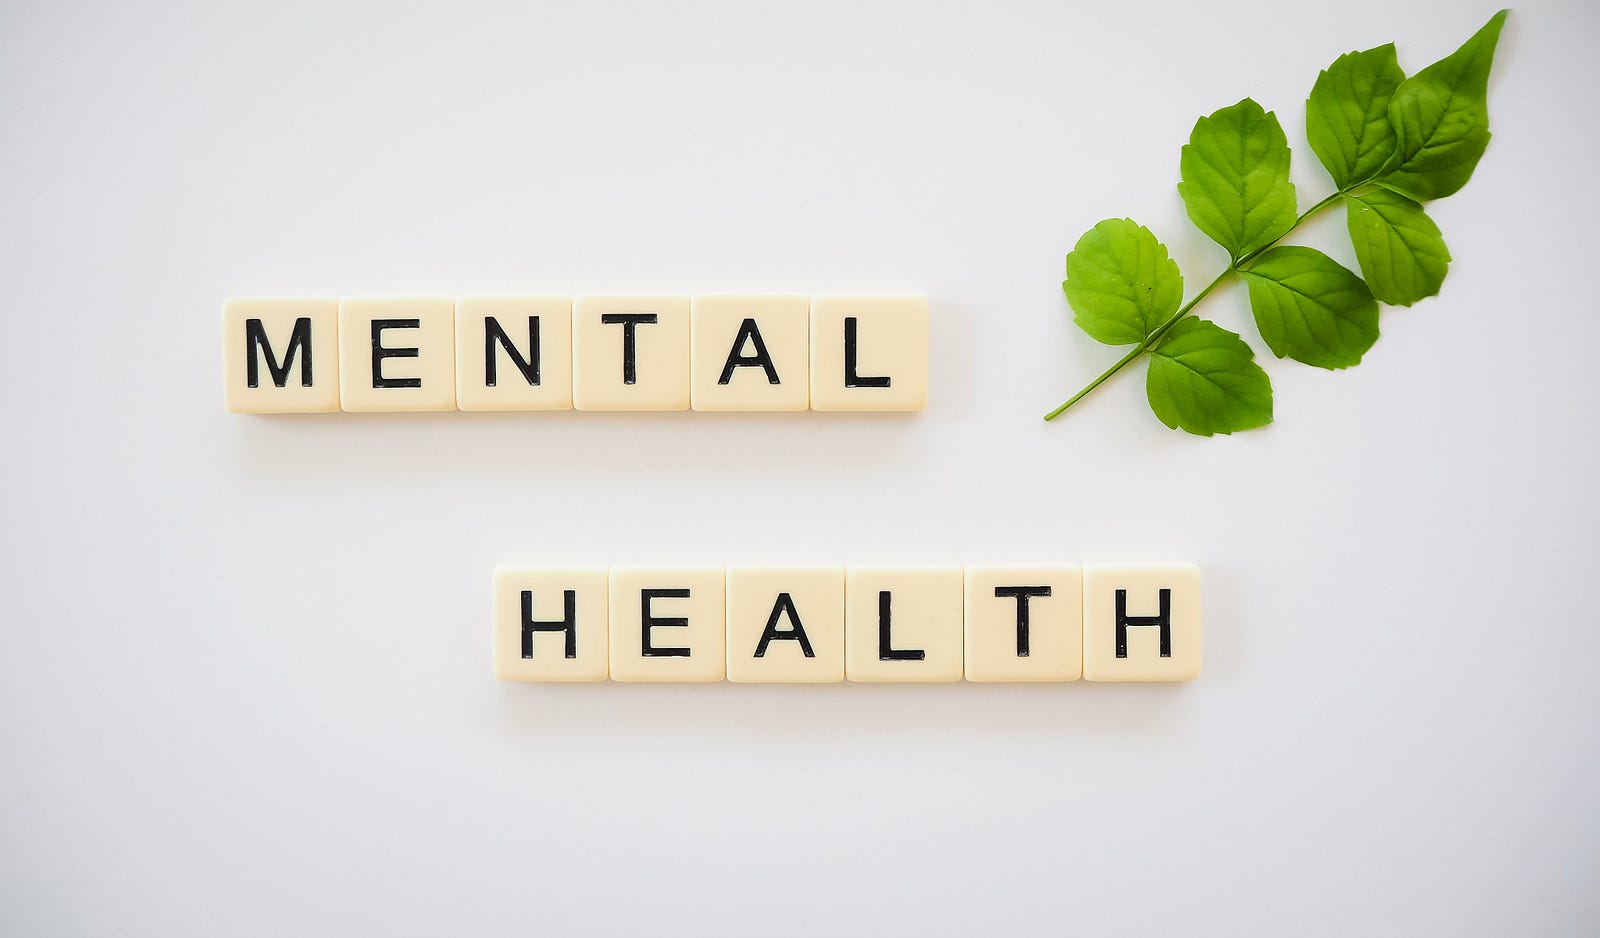 “MENTAL HEALTH” is spelled out in off-white tiles. A short twig holds eight leaves in the image upper right. Running can improve mental health.